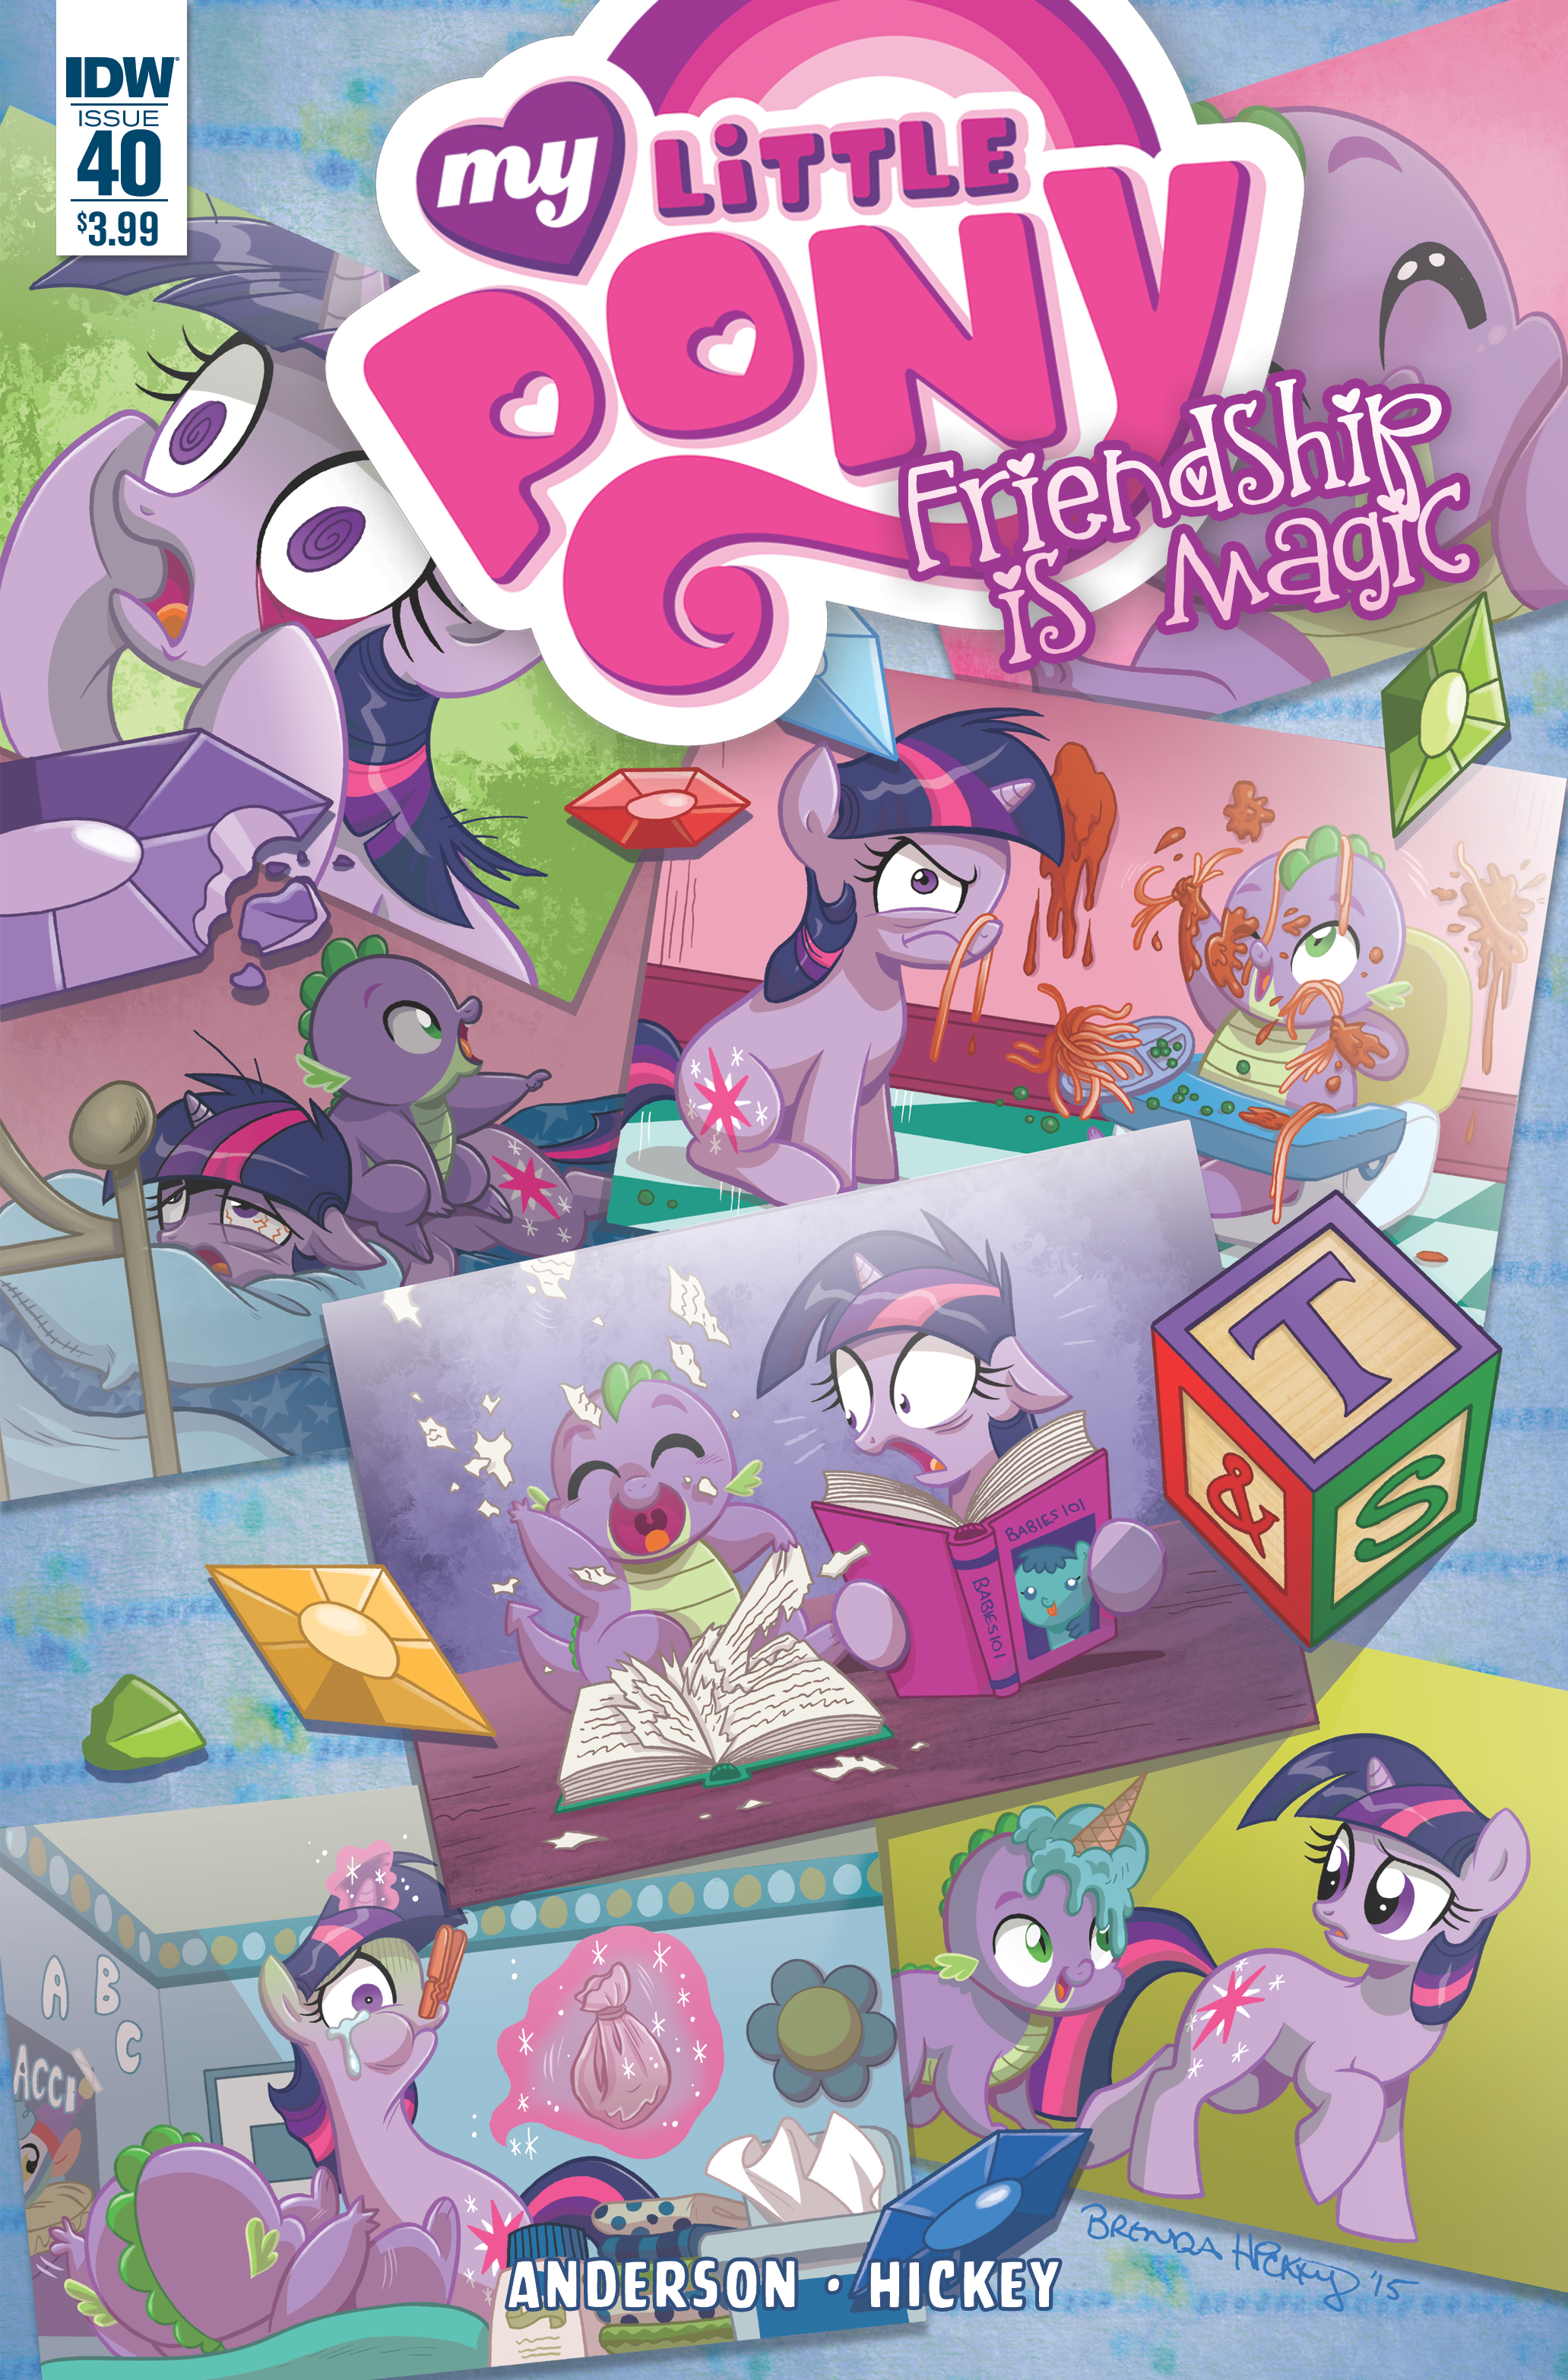 Friendship Is Magic Issue 40 My Little Pony Friendship Is Magic